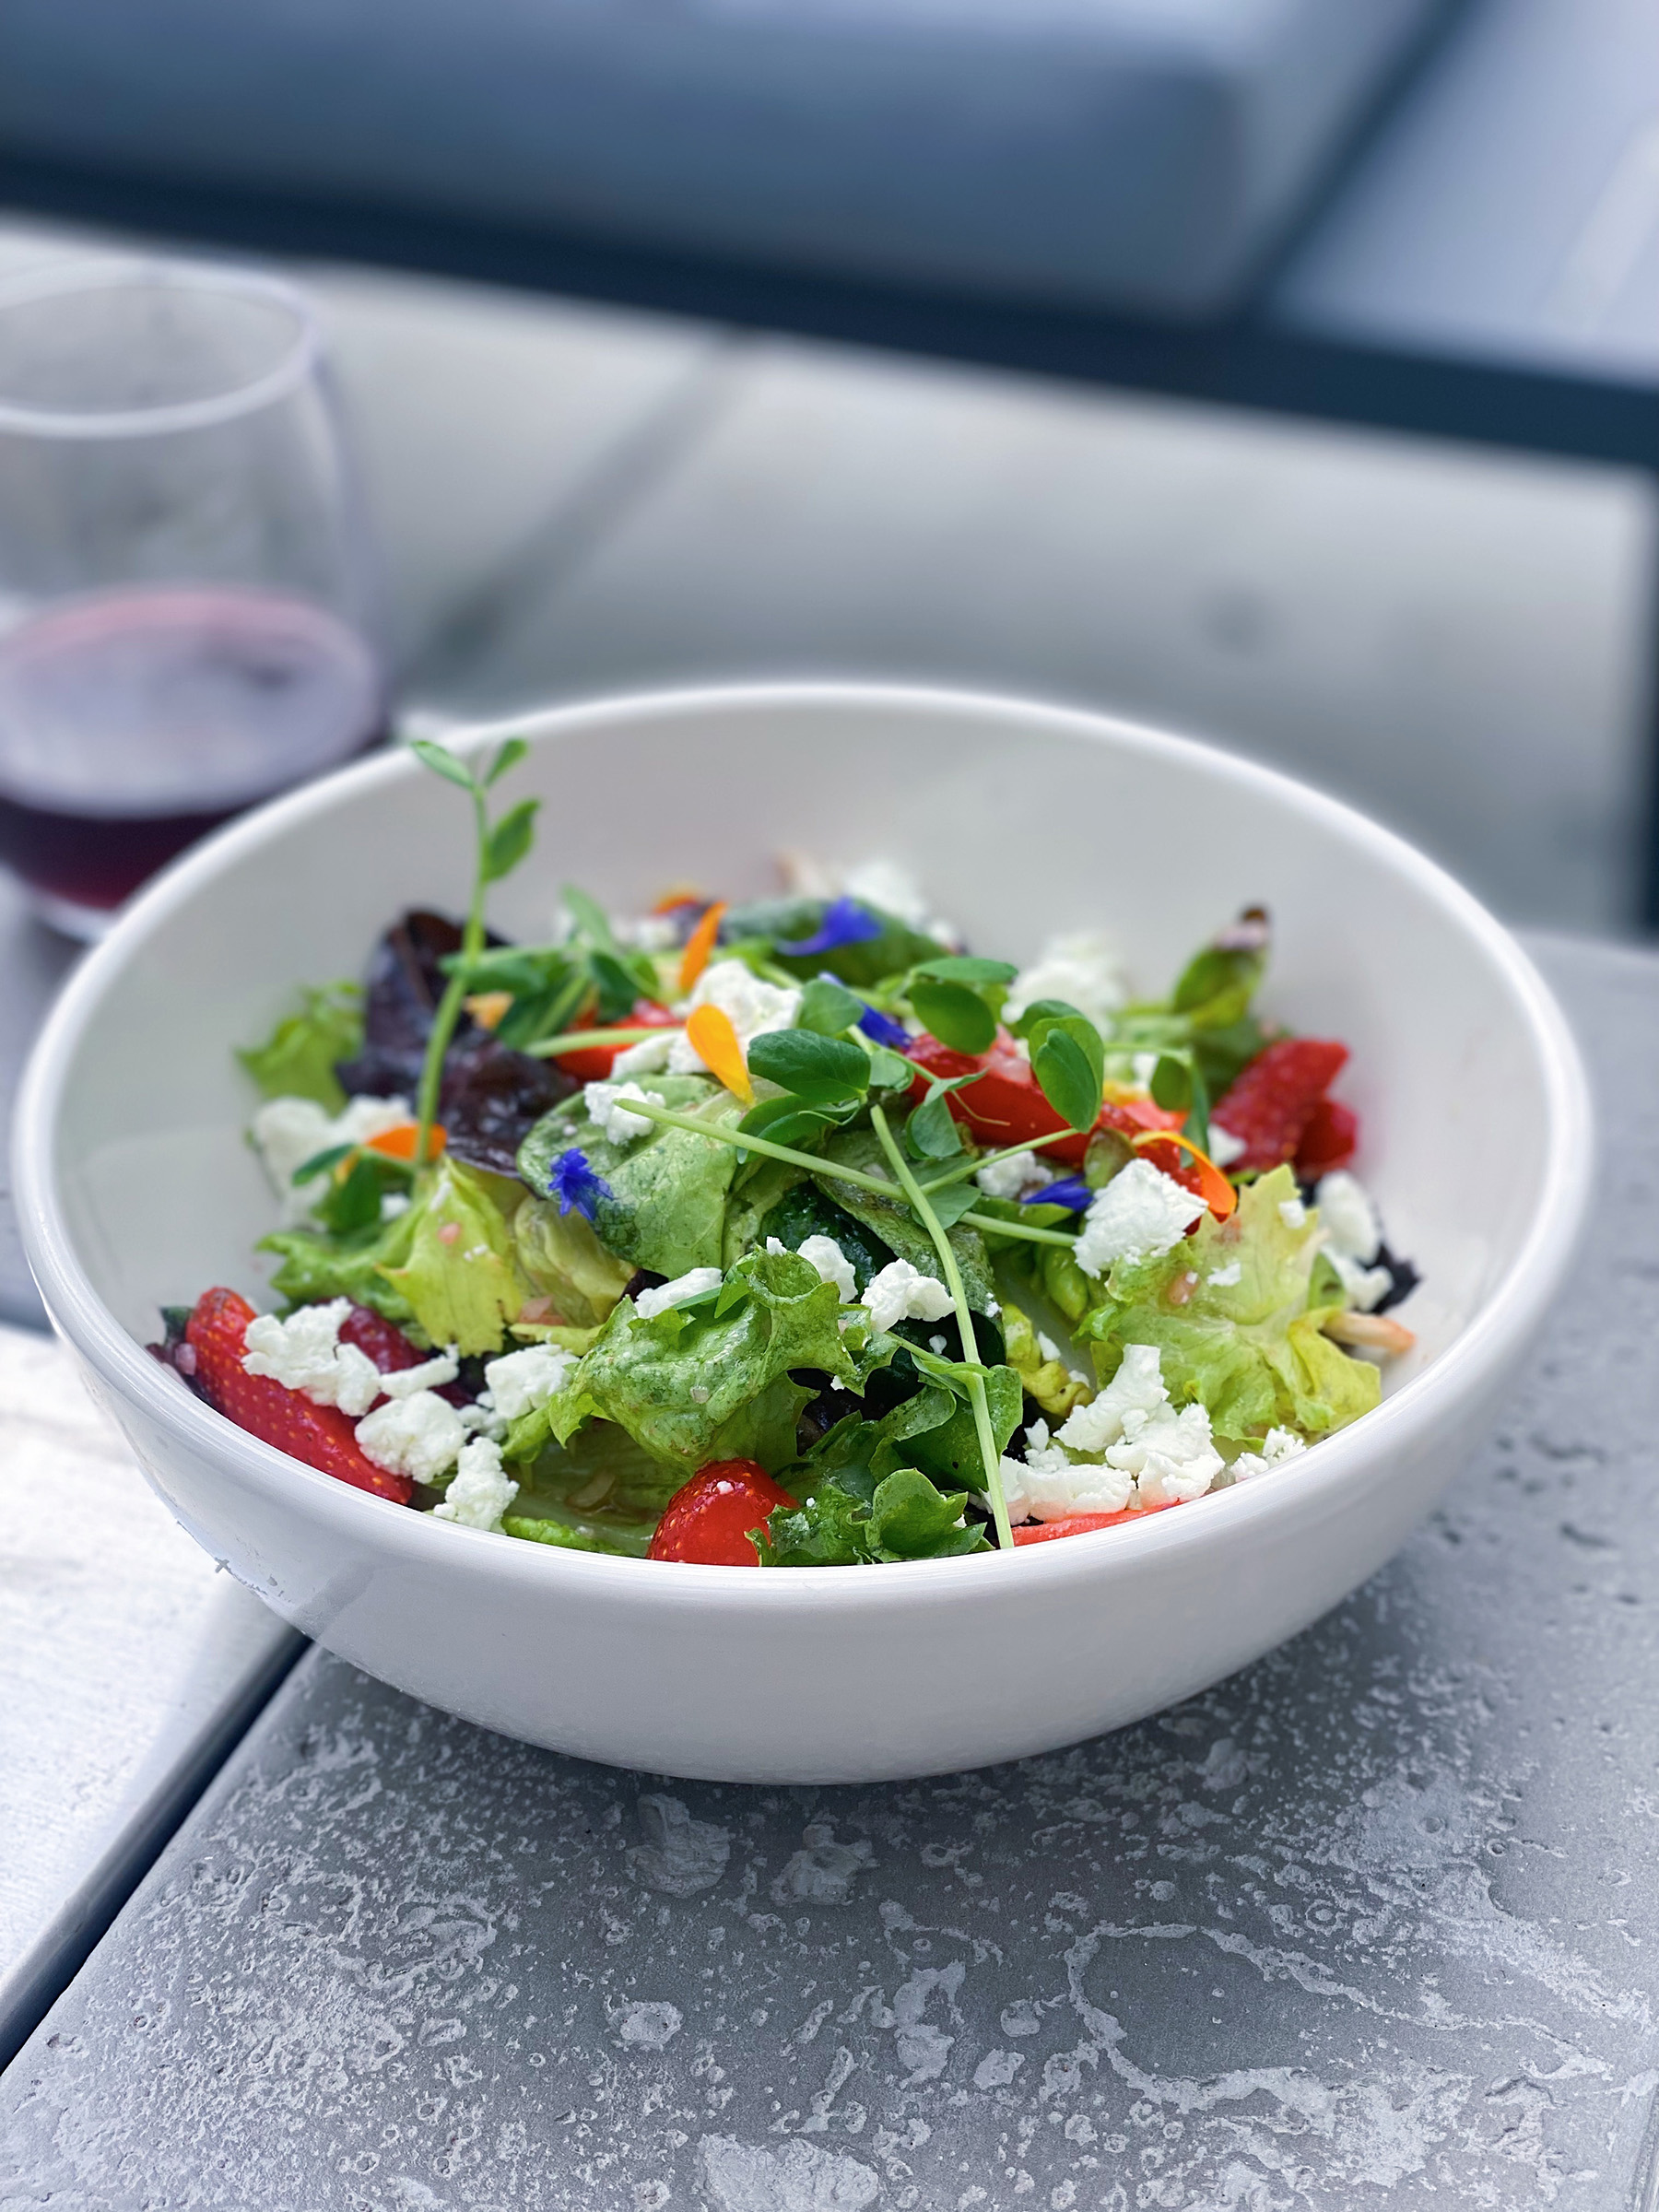 Chef Jennifer McMurray's goat cheese and strawberry salad at Kivelstadt Cellars & Winegarten in Sonoma. (Courtesy os Kivelstadt Cellars & Winegarten)